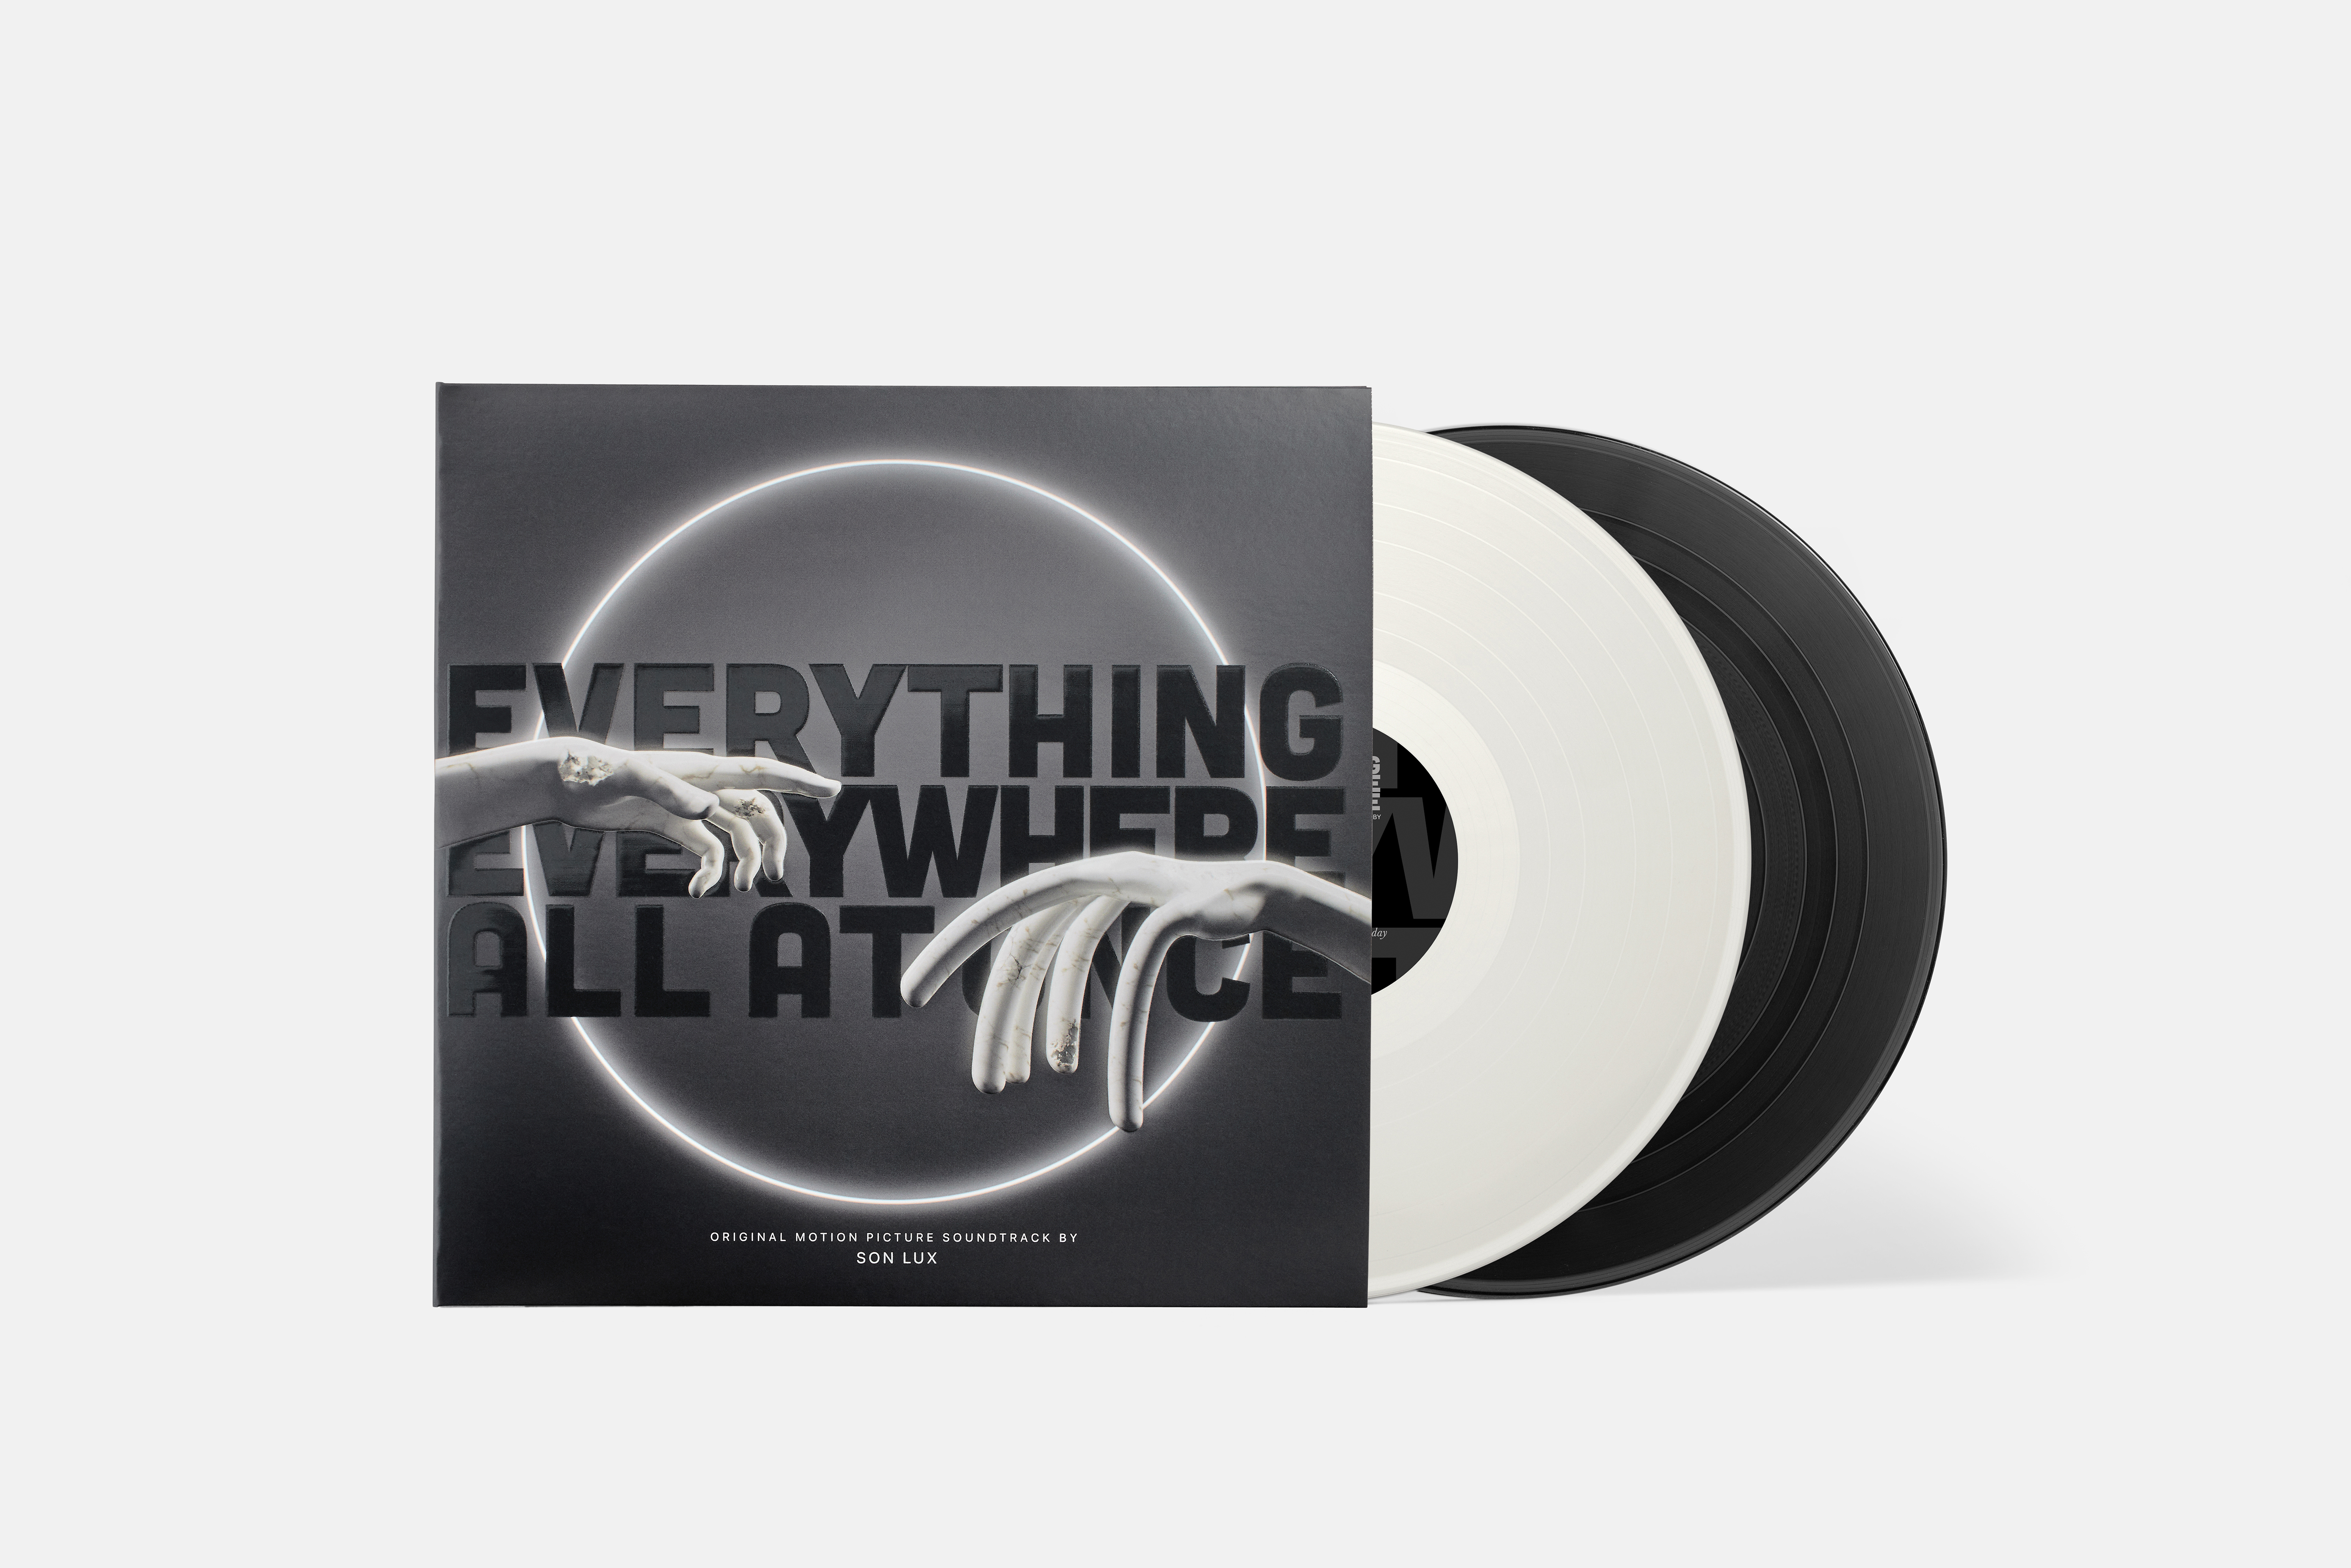 Everything Everywhere All At Once Original Motion Picture Soundtrack Music By Son Lux A24 Shop 